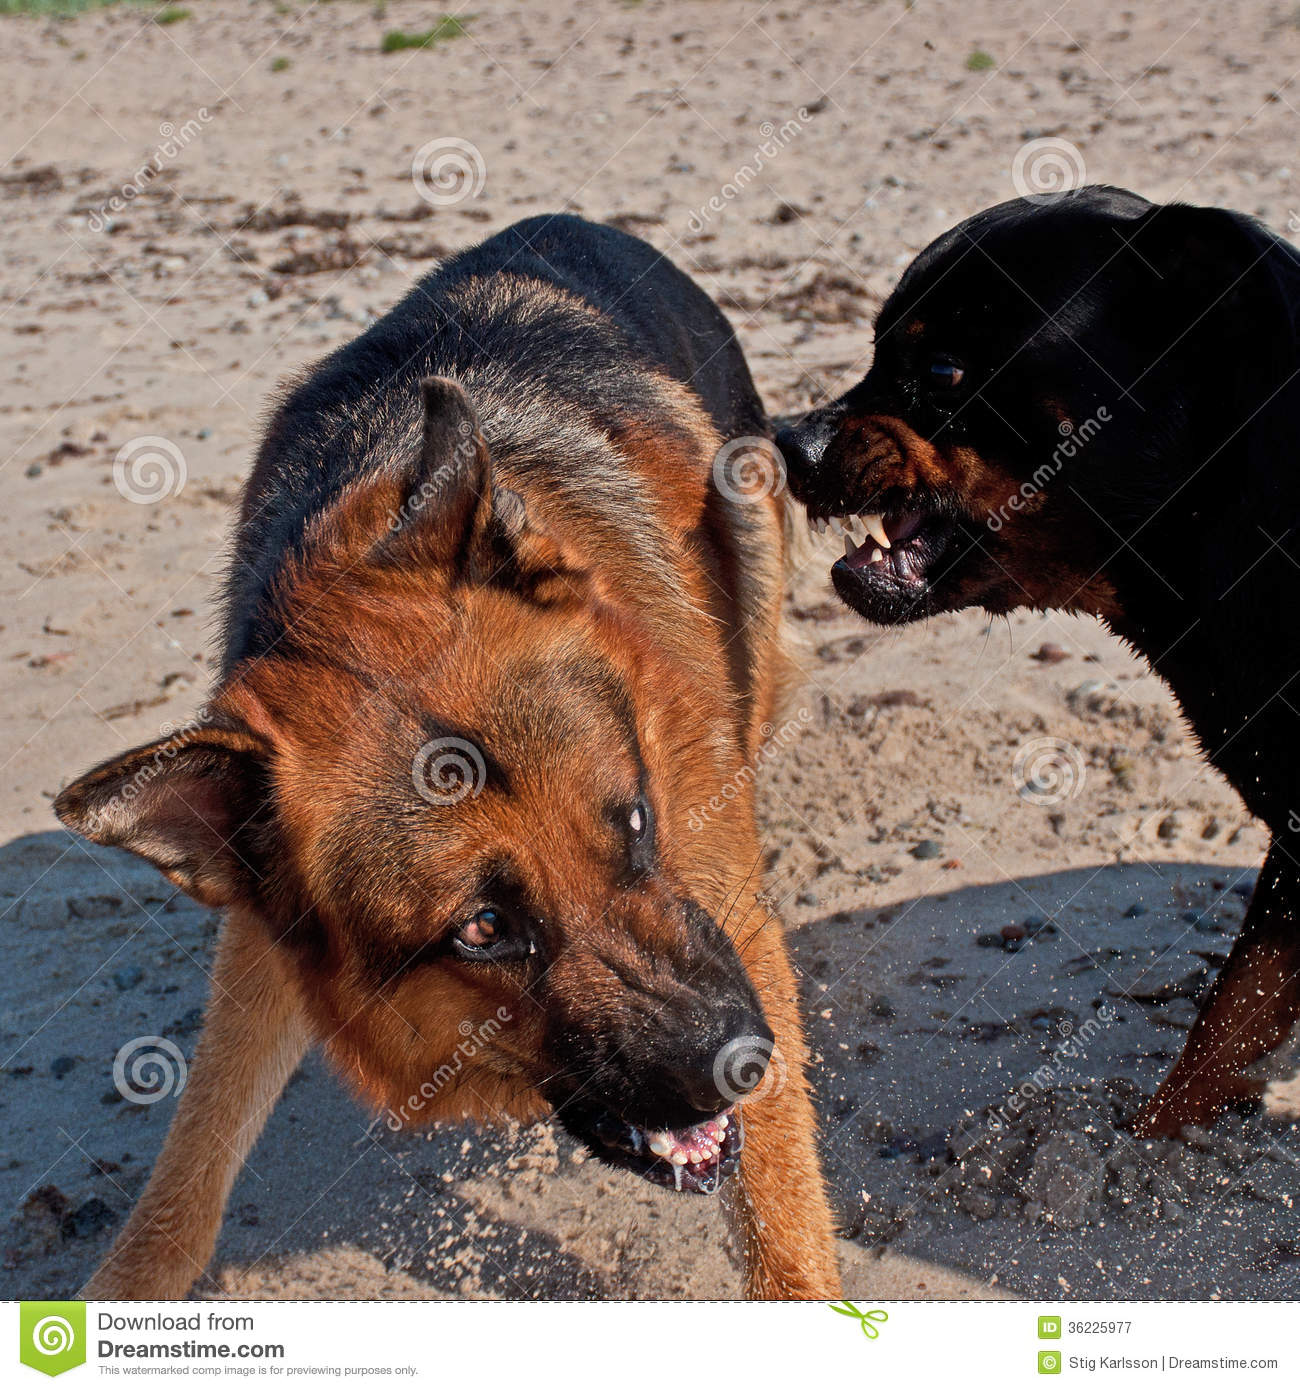 Two Large Dogs Fighting On The Beach Royalty Free Stock Photography    